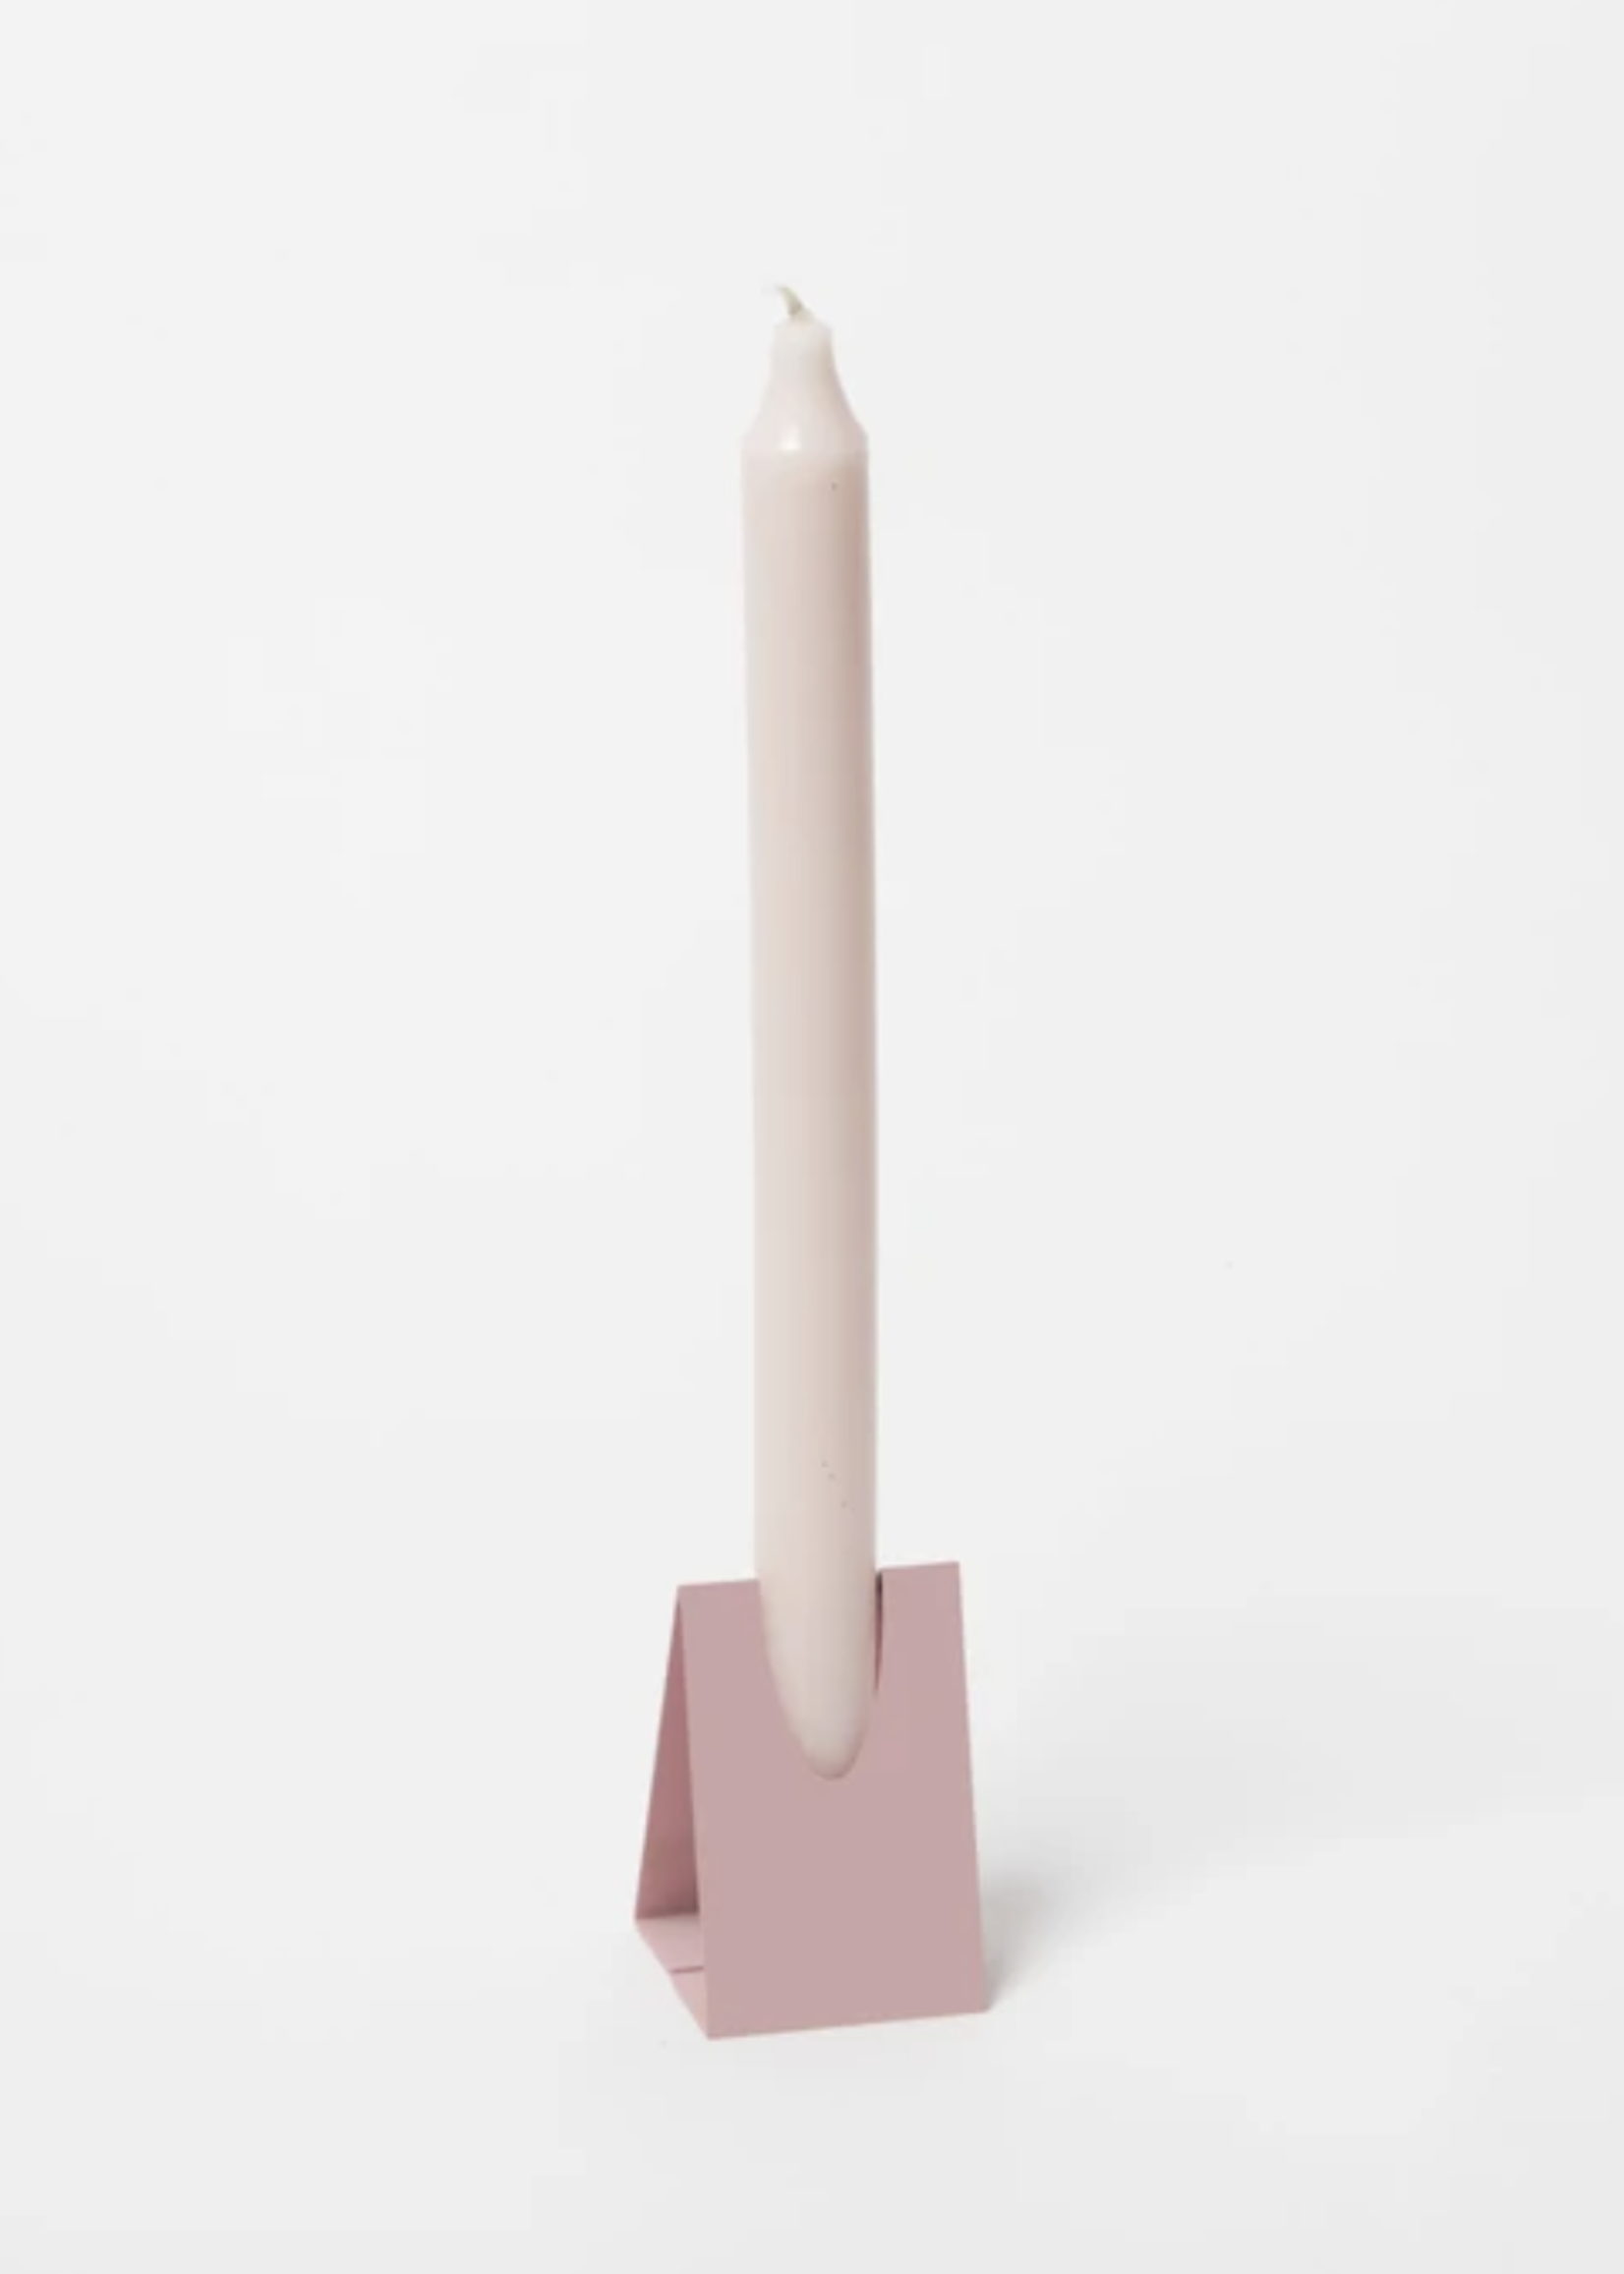 Block Design Limited Triangle Candle Holders by Block Design